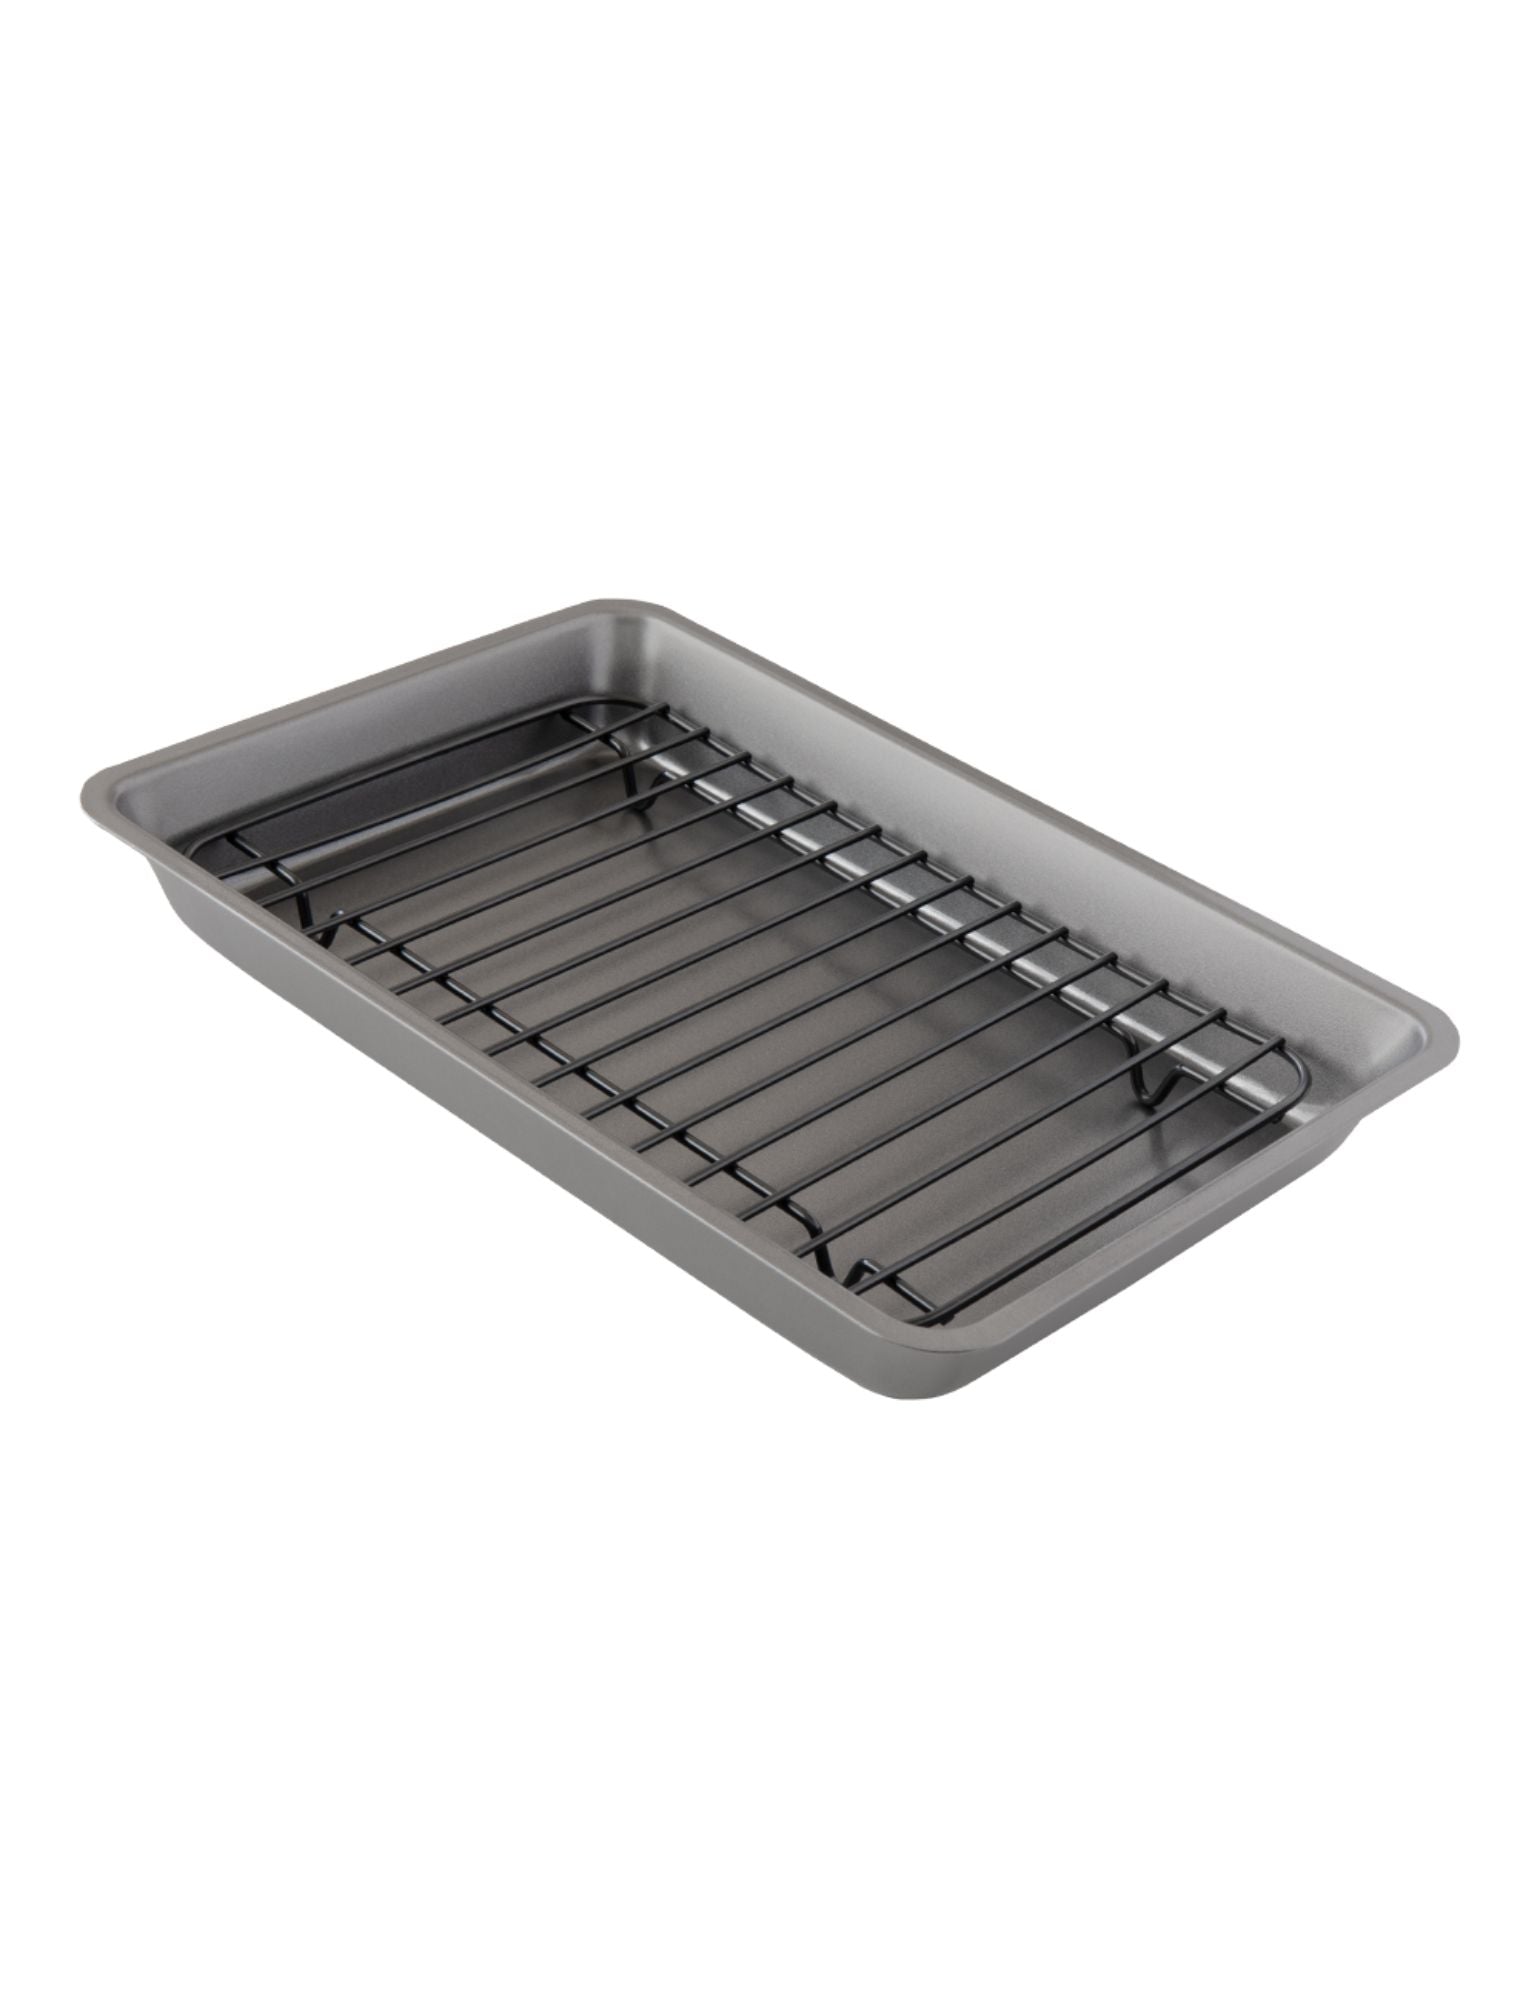 Chef Pomodoro Copper Crisper Tray, Deluxe Air Fry In Your Oven, 2-piece Set  (round - Large)